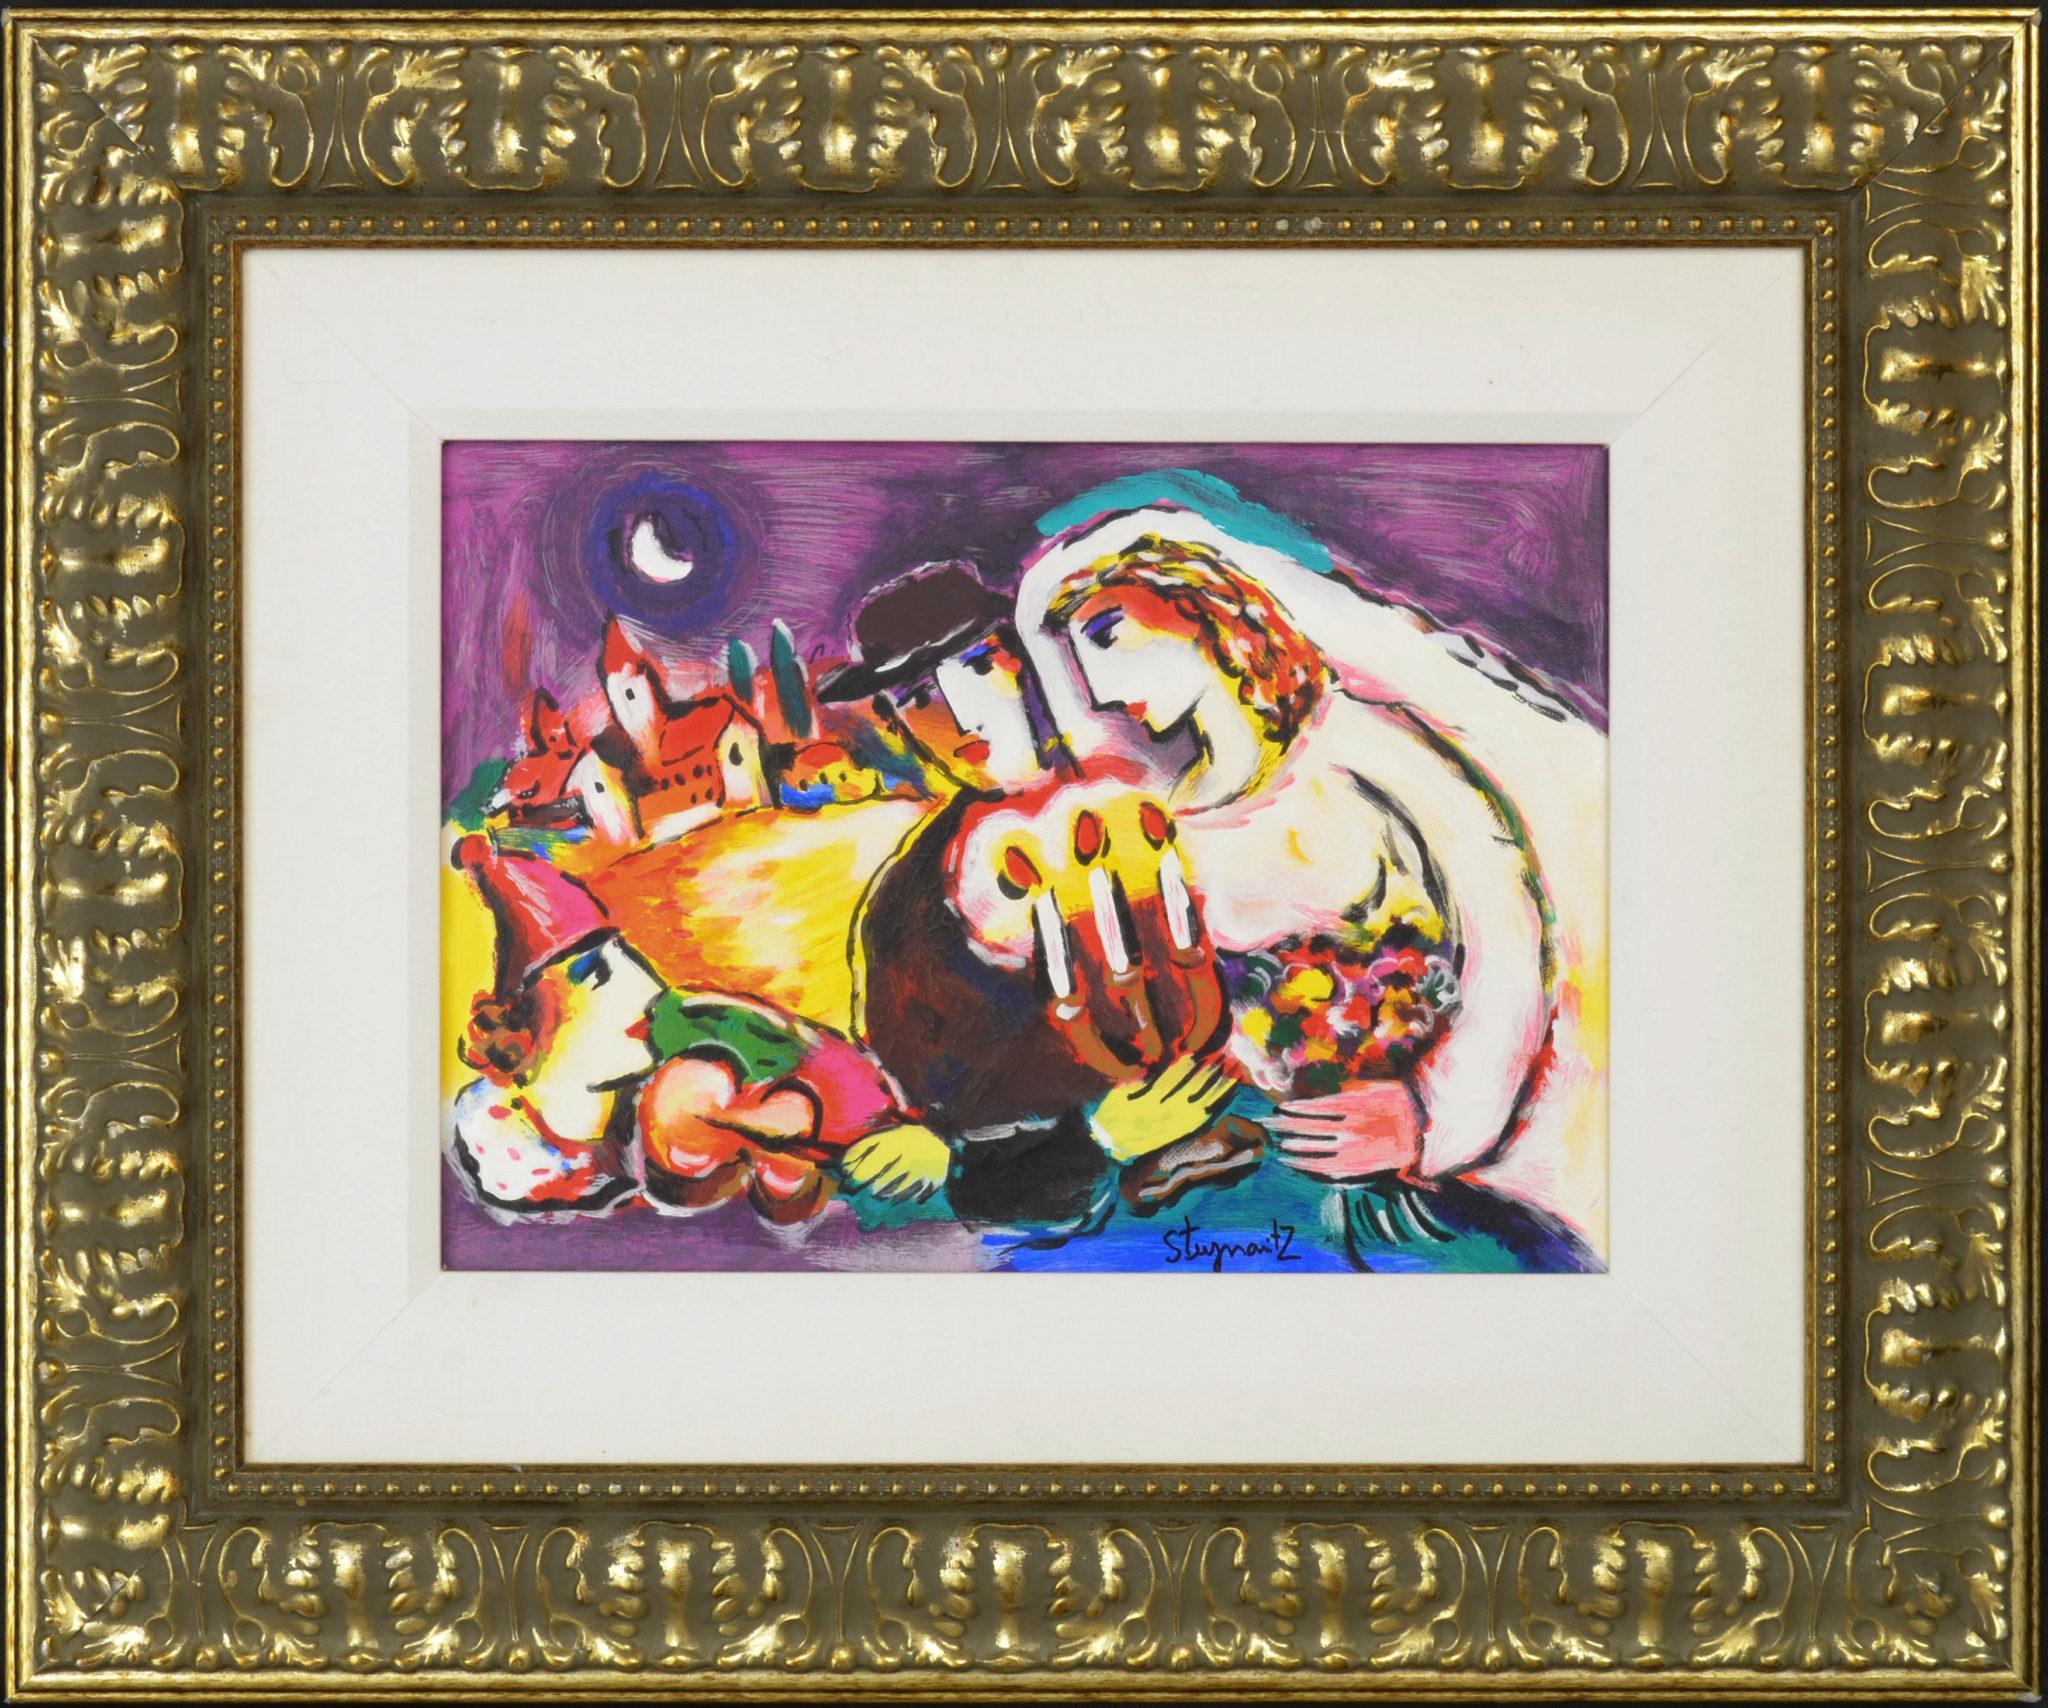 Rare Artist Proof (AP) Color Serigraph Hand Embellished by the famous and well-listed artist Zammy Steynovitz (1951 – 2000) Entitled "Romantic Nights"  This is a Limited Edition Artist Proof of only 24 copies  Print and Embellishments on Board 